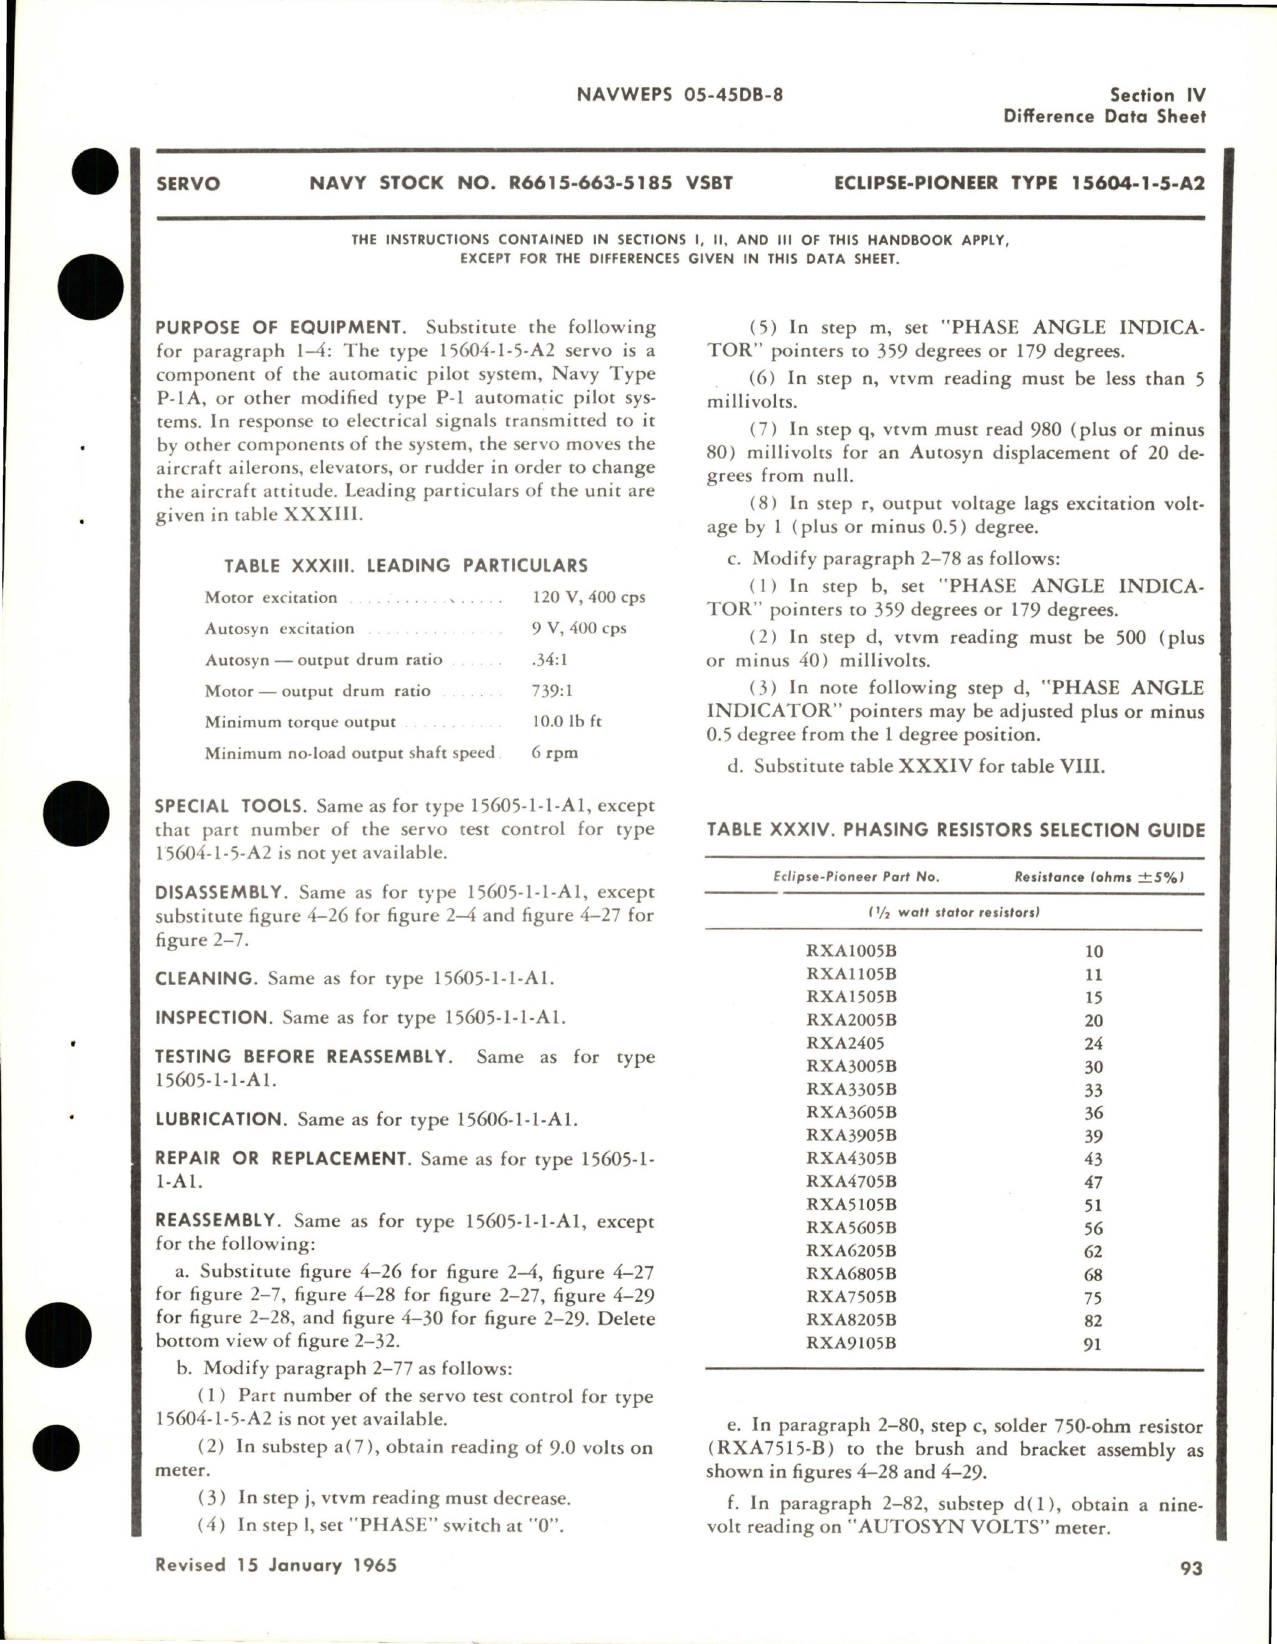 Sample page 5 from AirCorps Library document: Overhaul Instructions for Servos